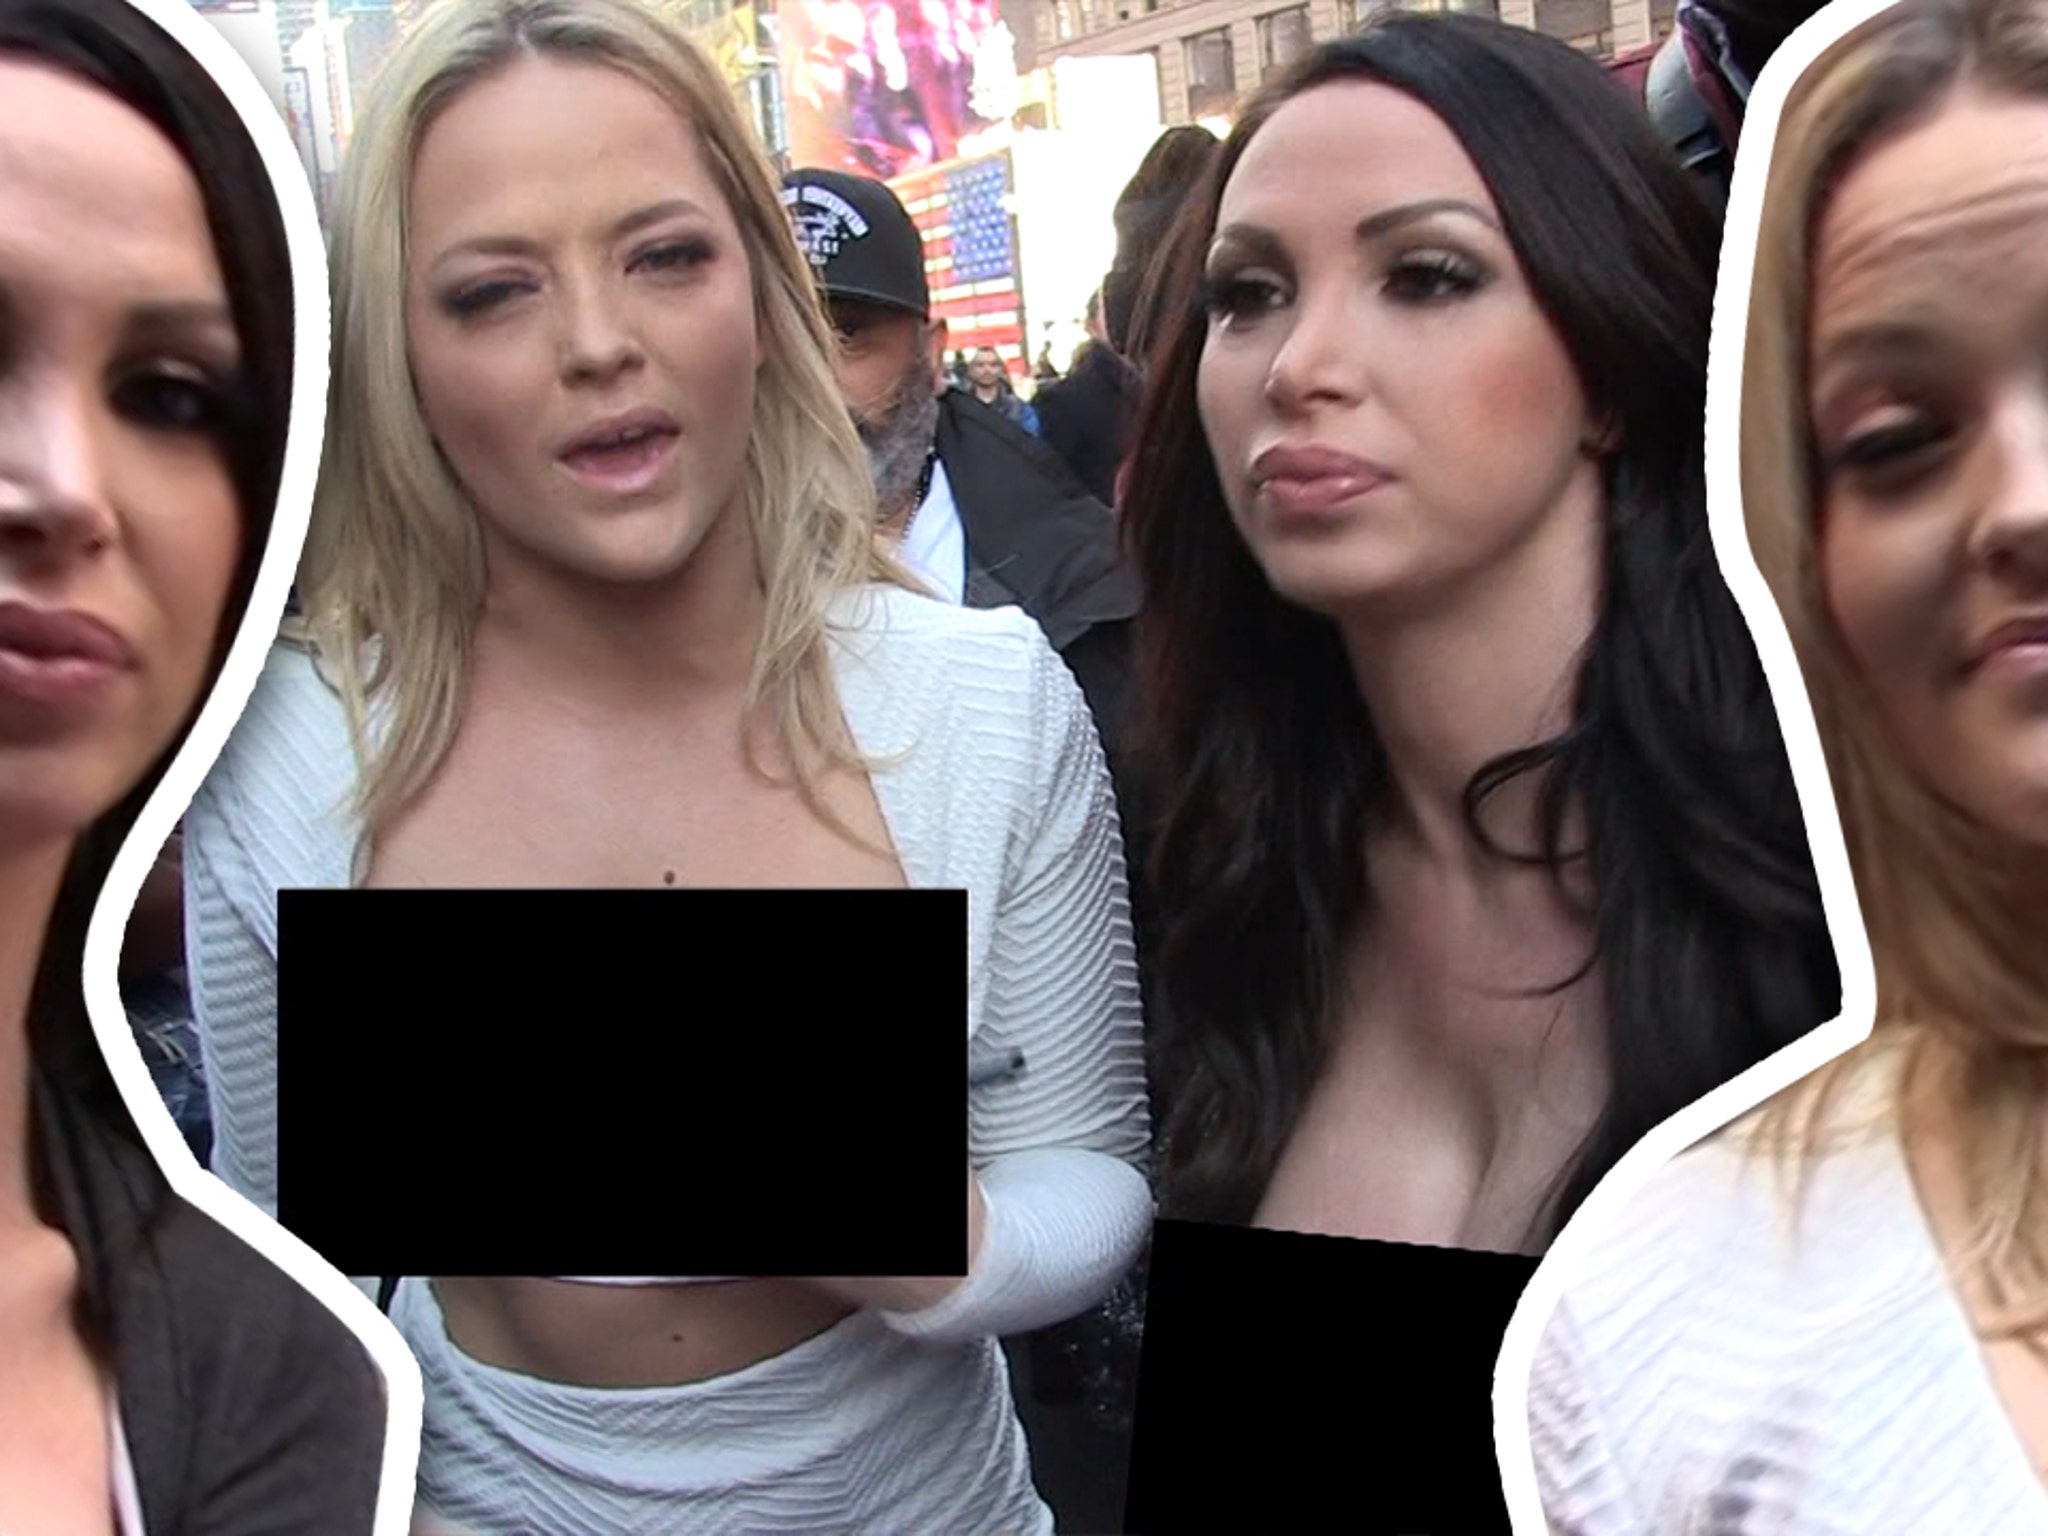 Two pornstars went topless in New York Cityâ€¦and for a great cause.